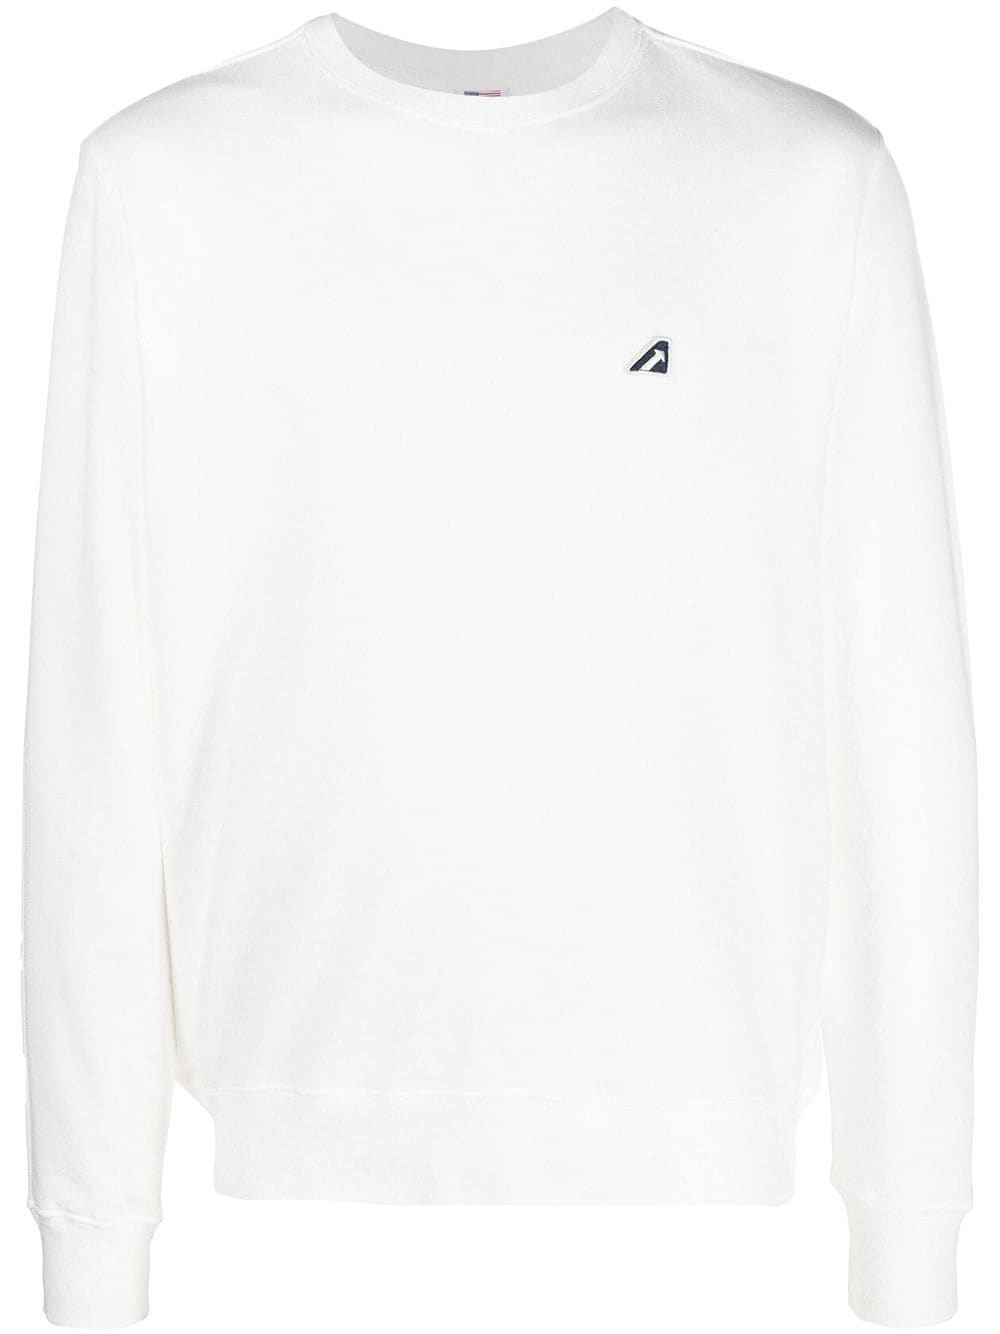 EMBROIDERED-LOGO LONG-SLEEVE T-SHIRT